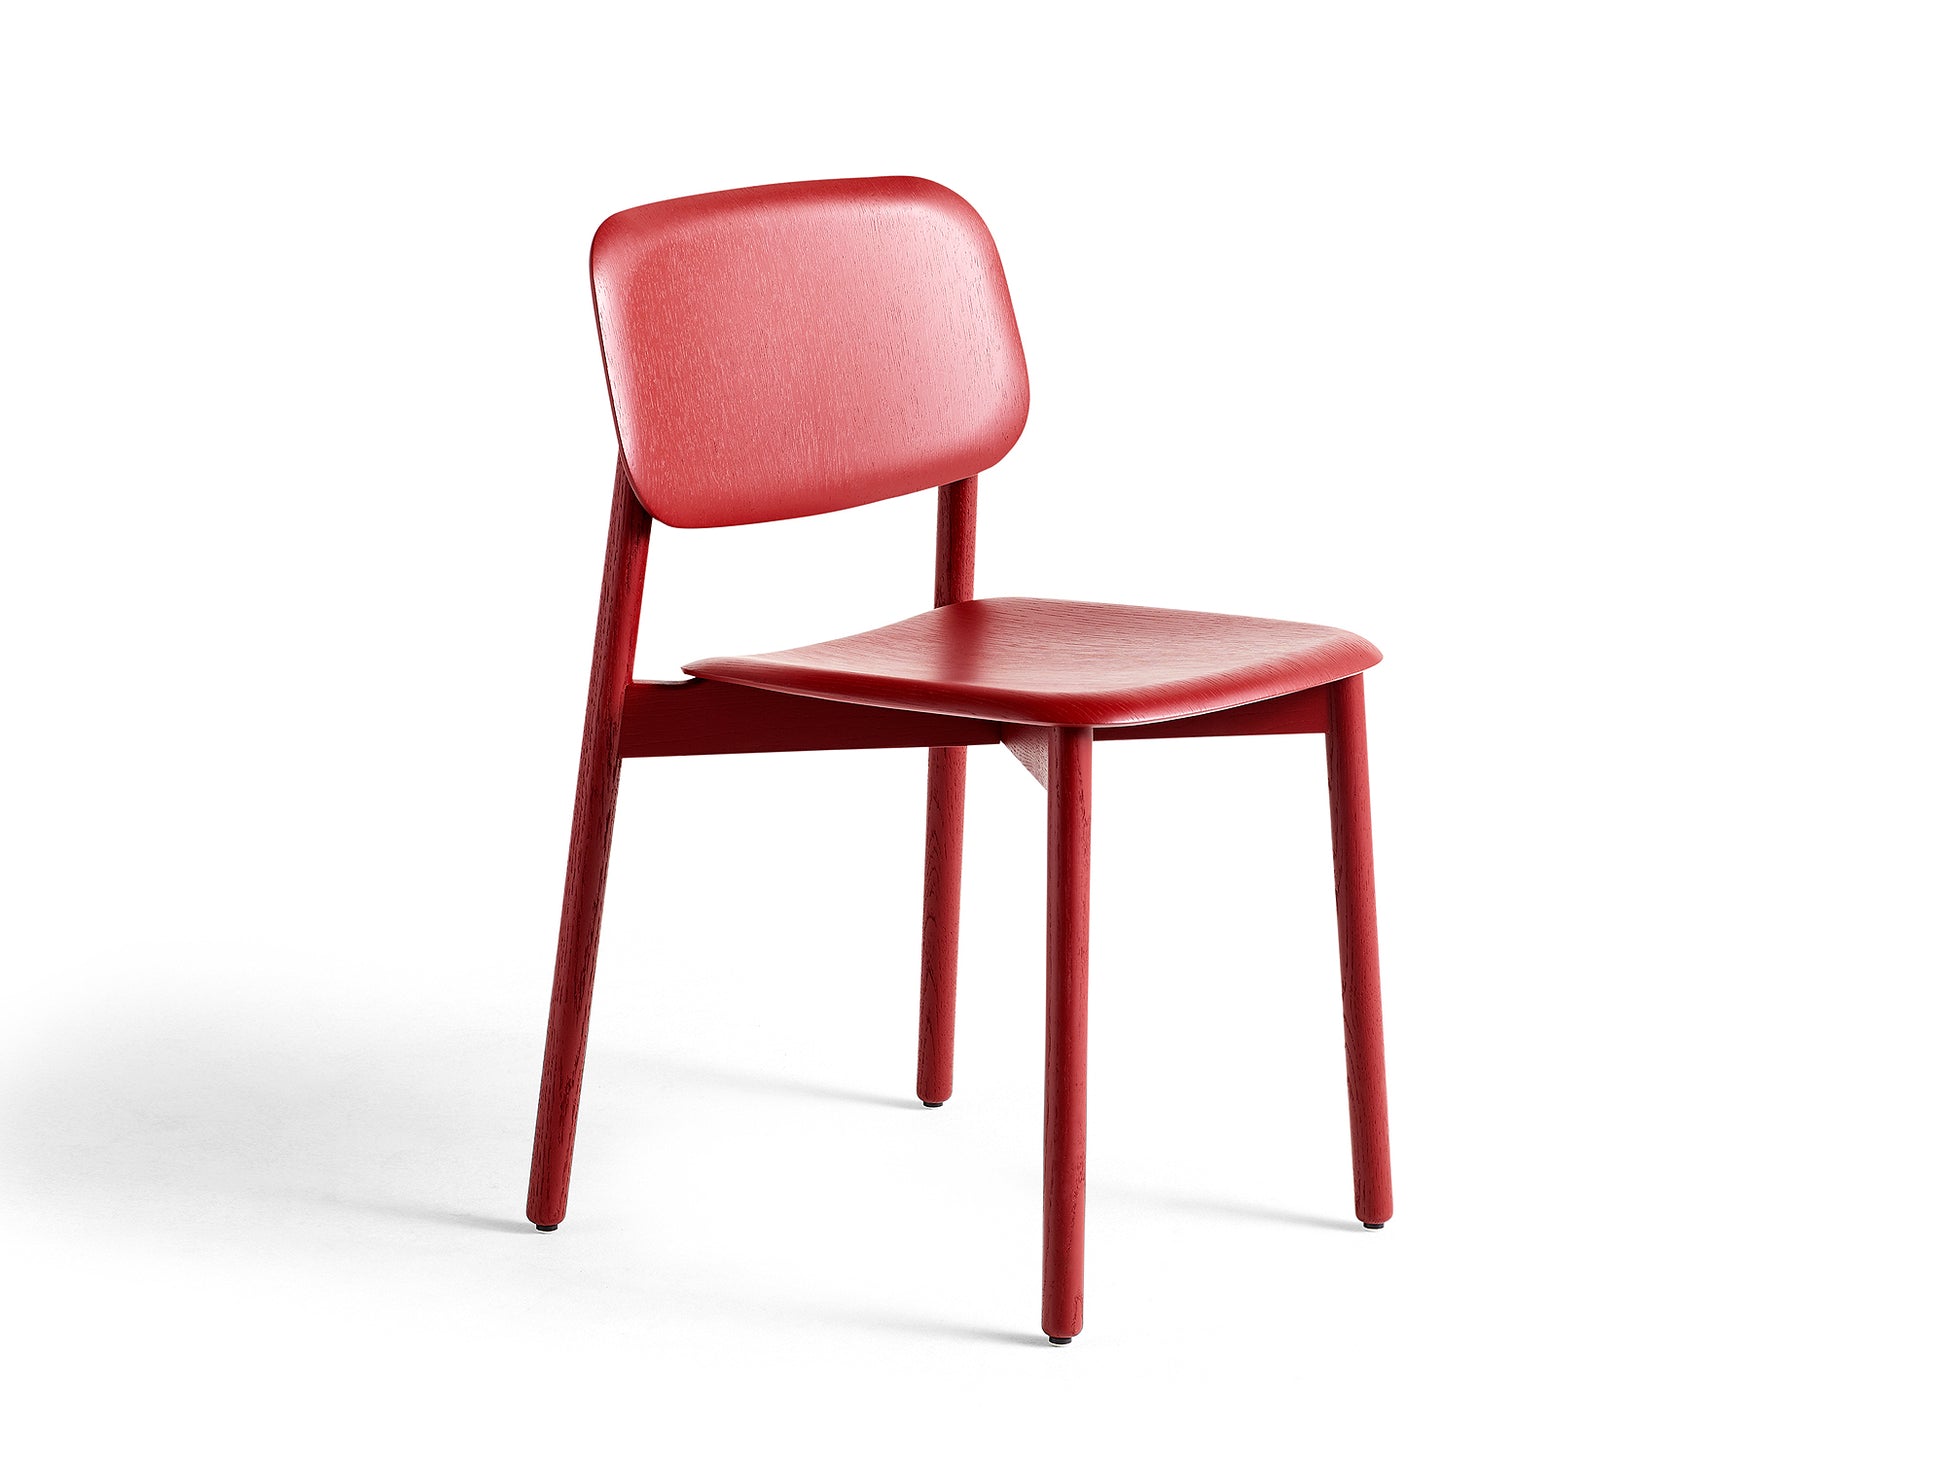 HAY Soft Edge 12 (Wood Dining Chair) - Fall Red